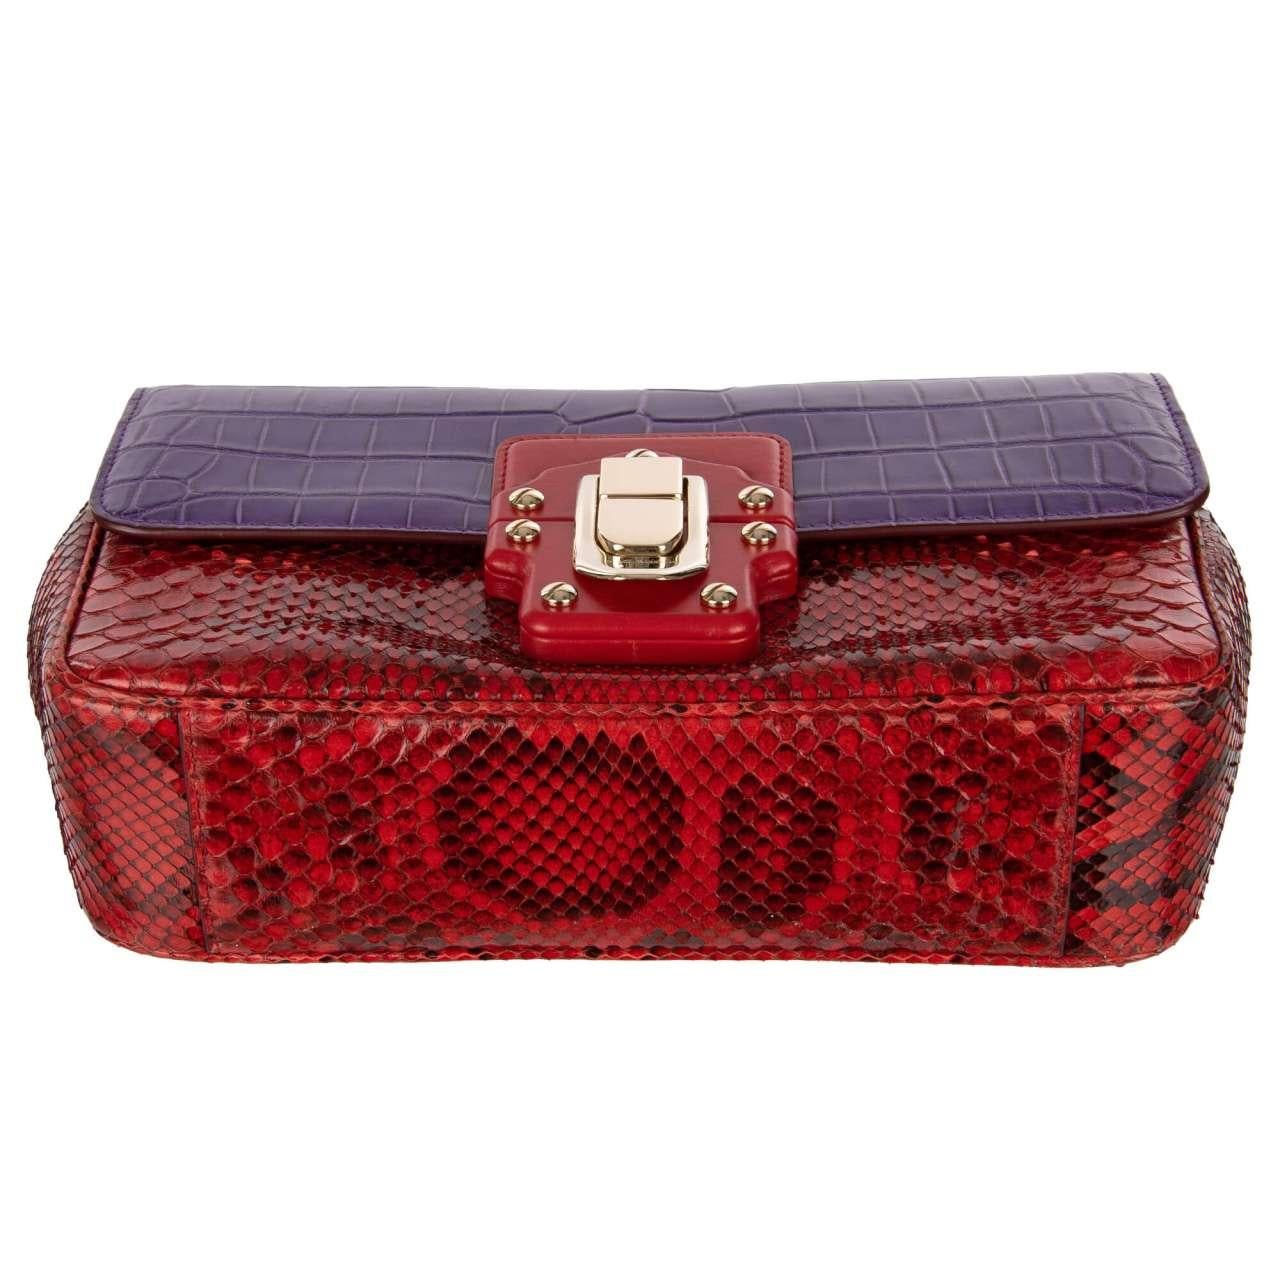 D&G Croco Snake Leather Shoulder Bag LUCIA with Chain Strap Red Purple For Sale 1